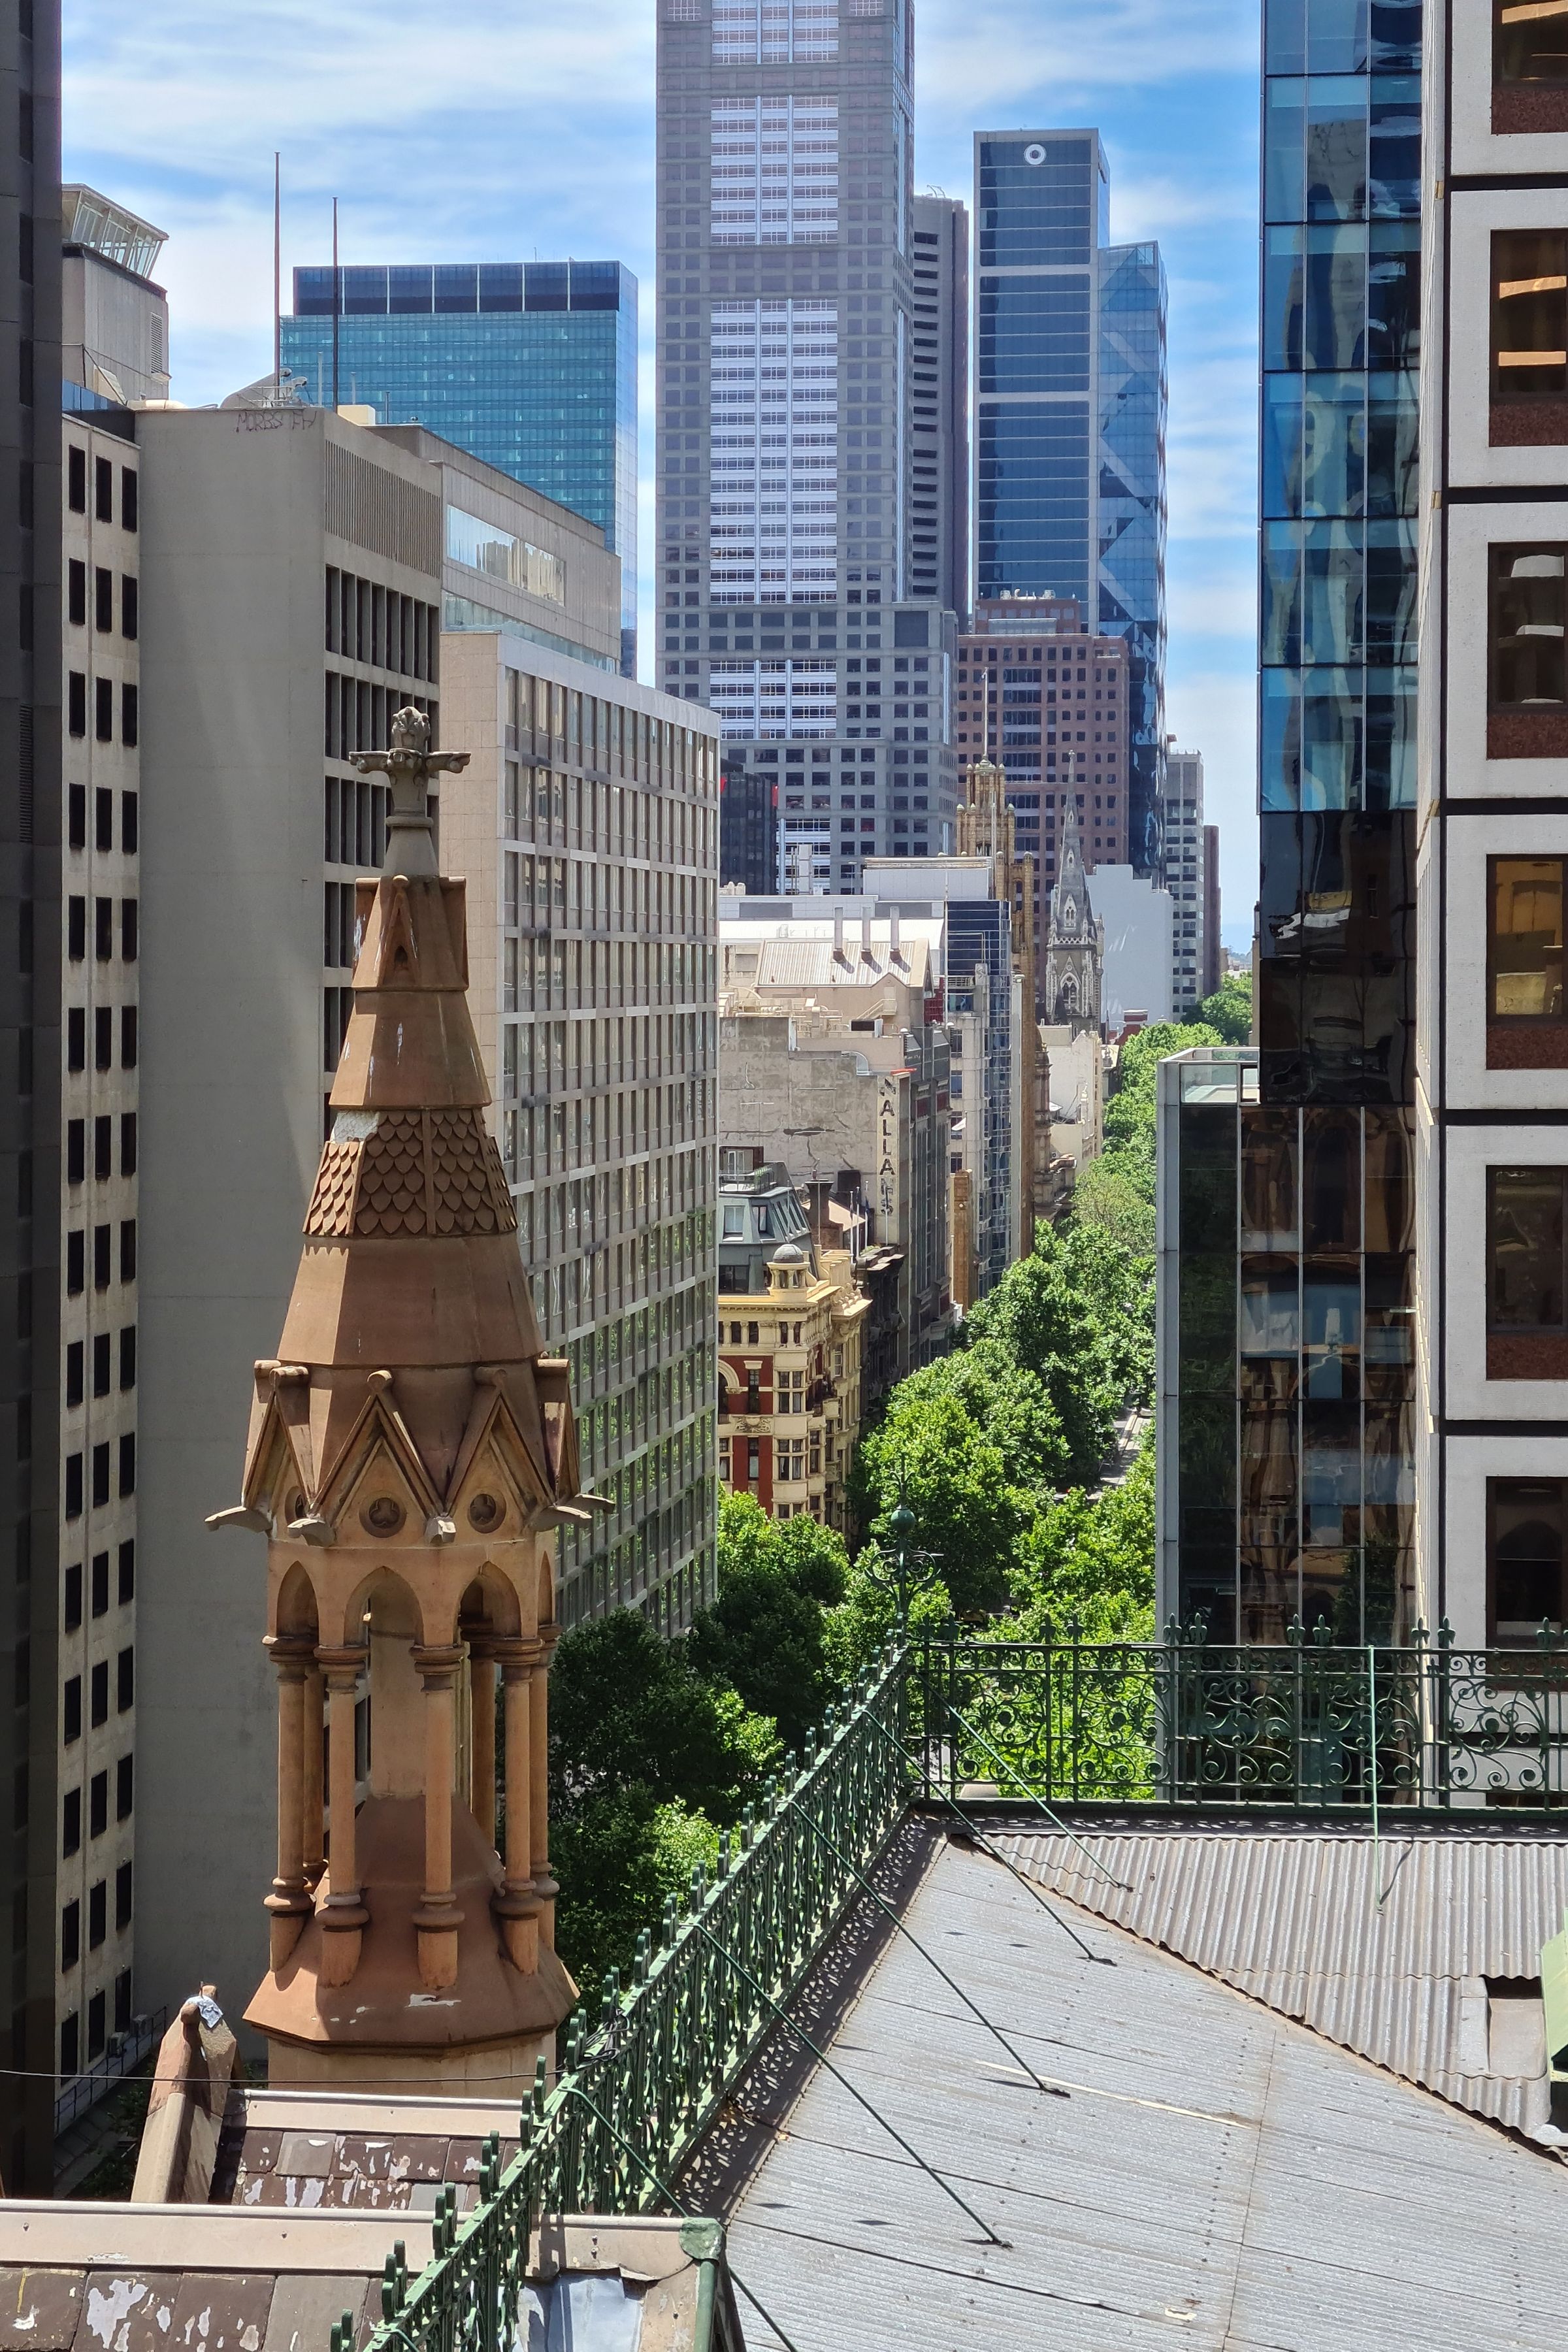 A view of a cityscape from a high perspective with a church spire in the foreground with modern high-rise buildings in the distance, heritage-style buildings at the street level and a tree-lined street